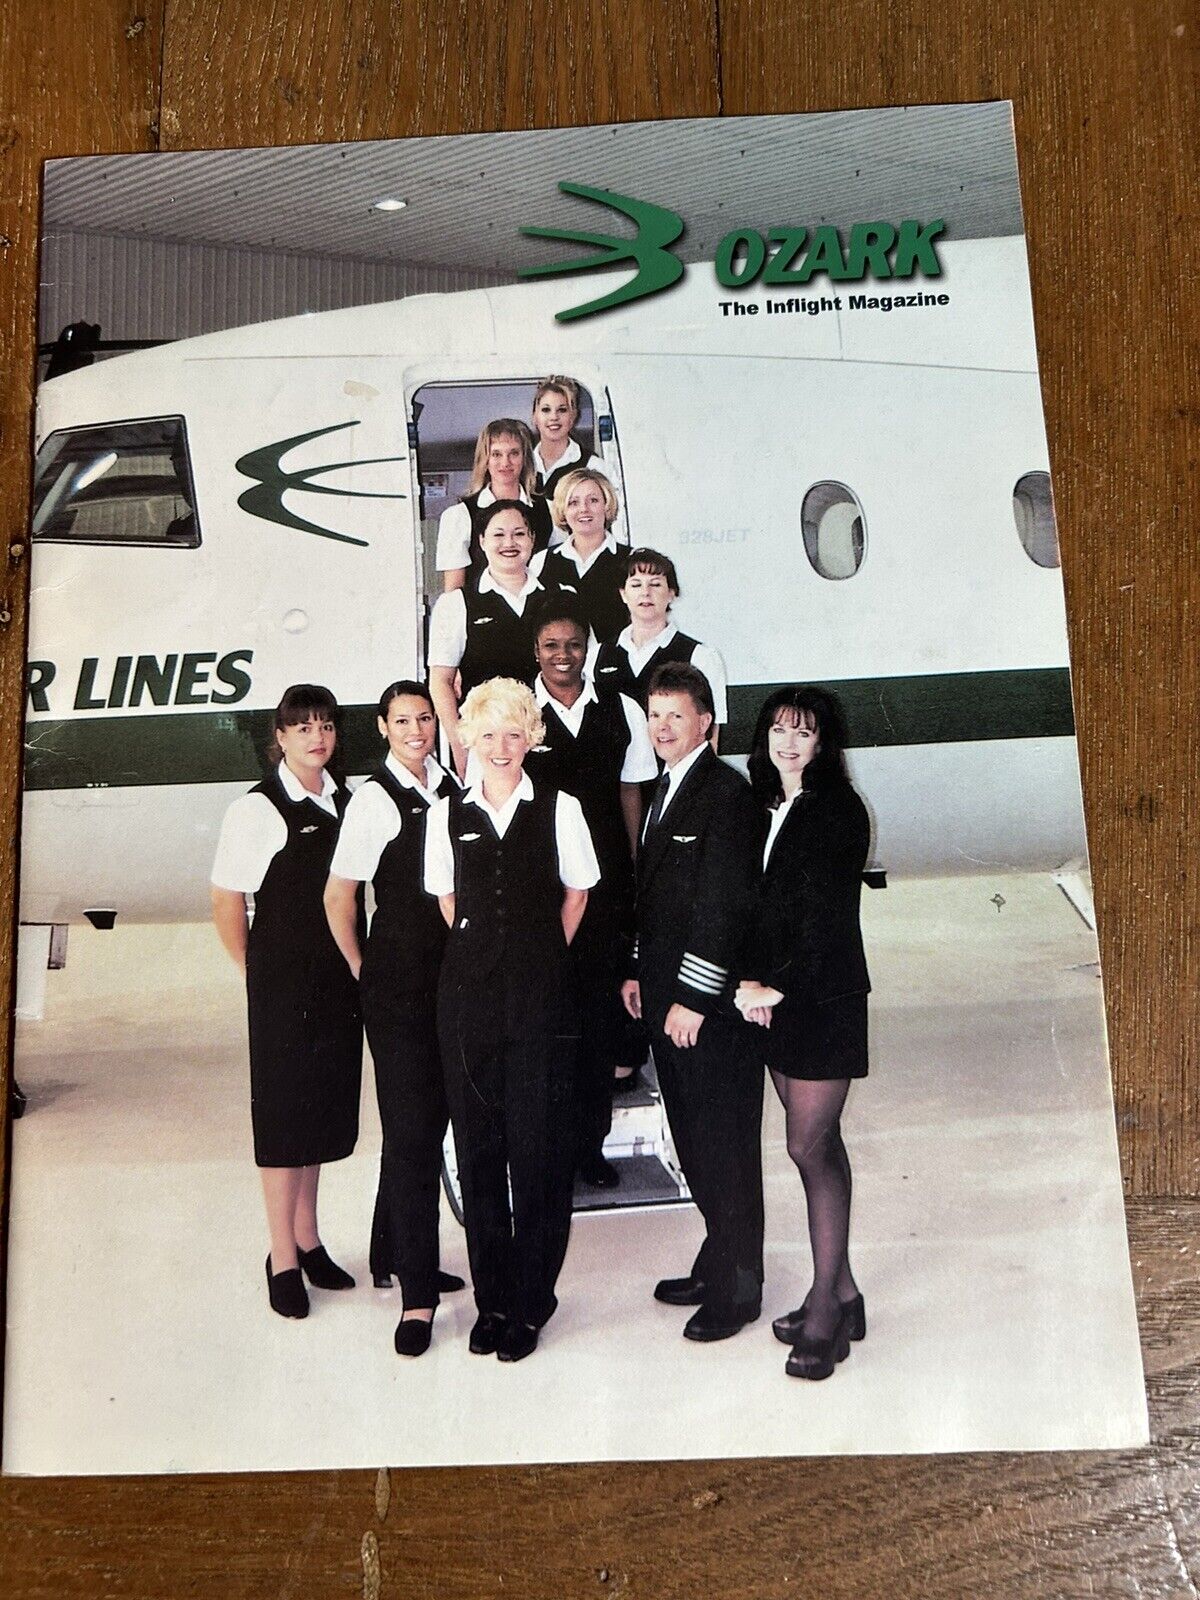 Ozark Air Lines Inflight Magazine 2000 collectible airplane 24 pgs